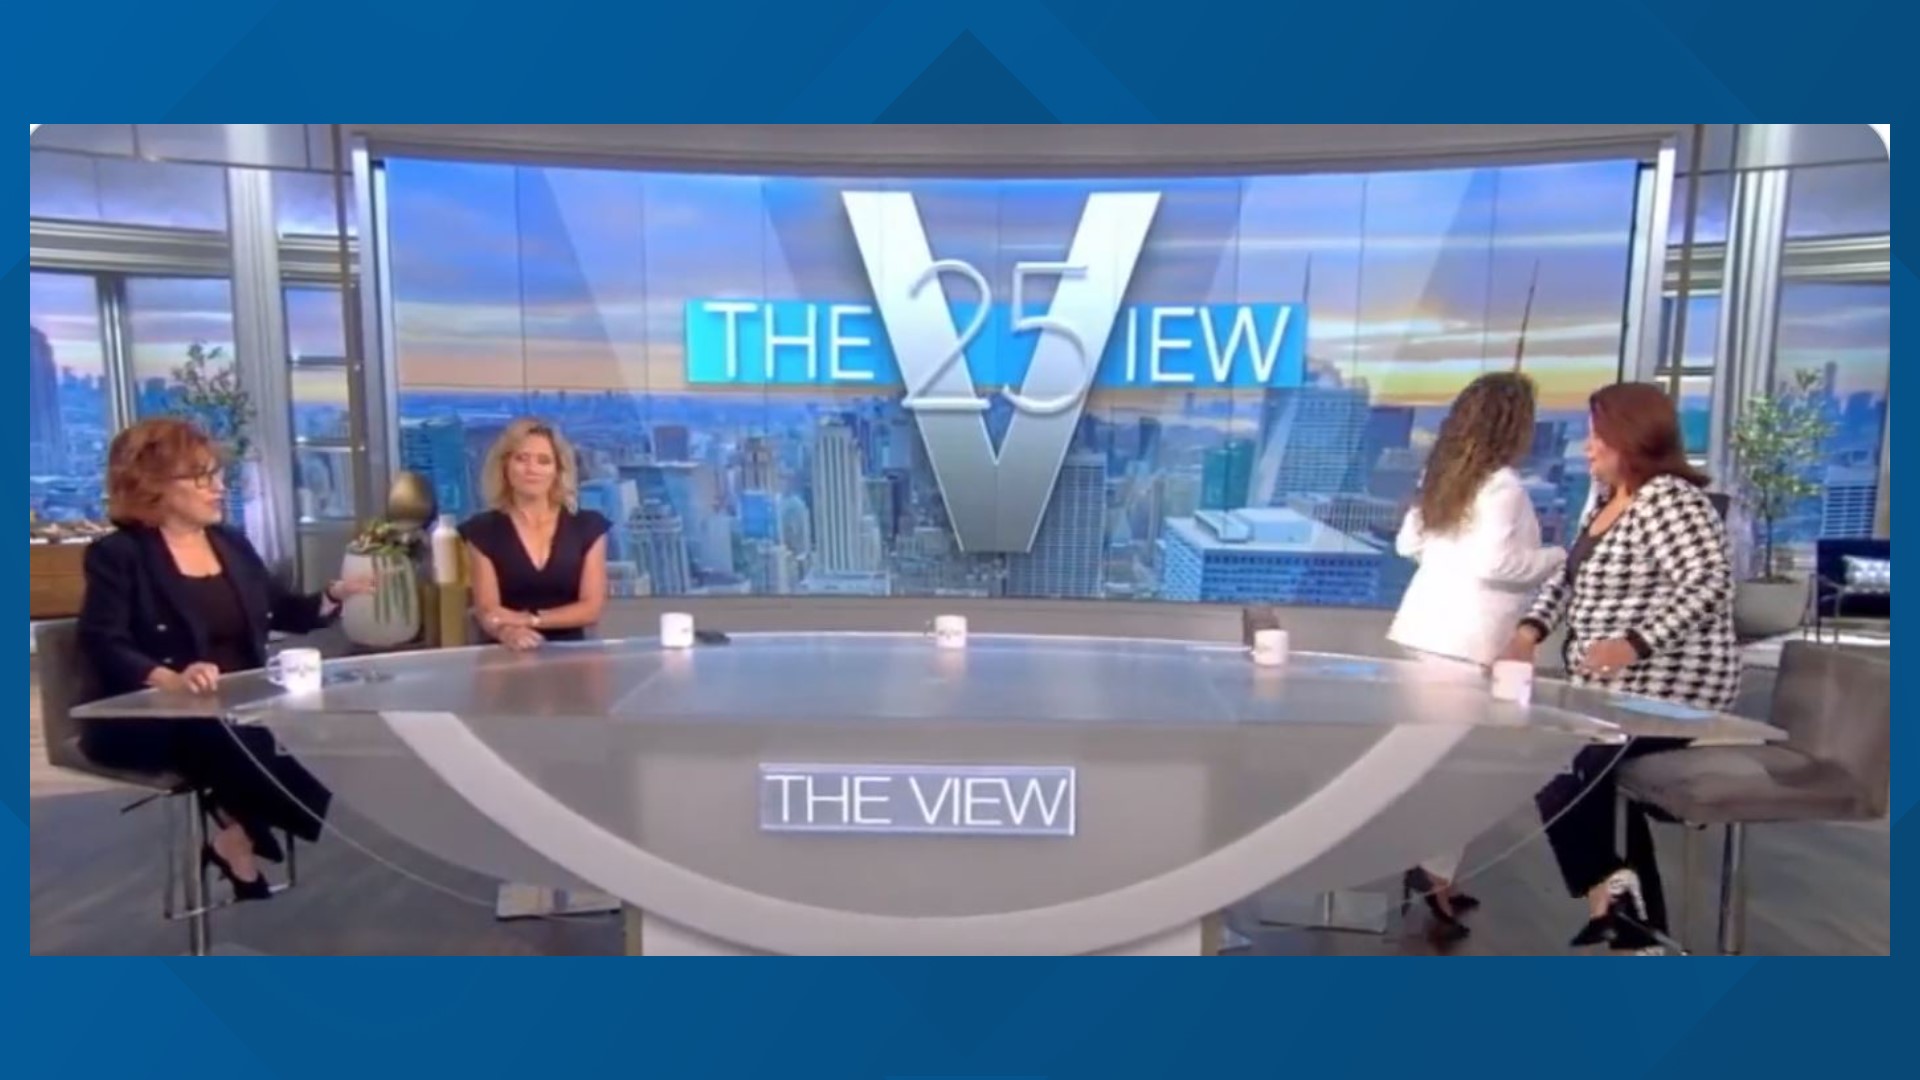 Co-hosts Sunny Hostin and Ana Navarro were asked to leave the set during a live airing of the talk show, and Vice President joined the remaining hosts remotely.